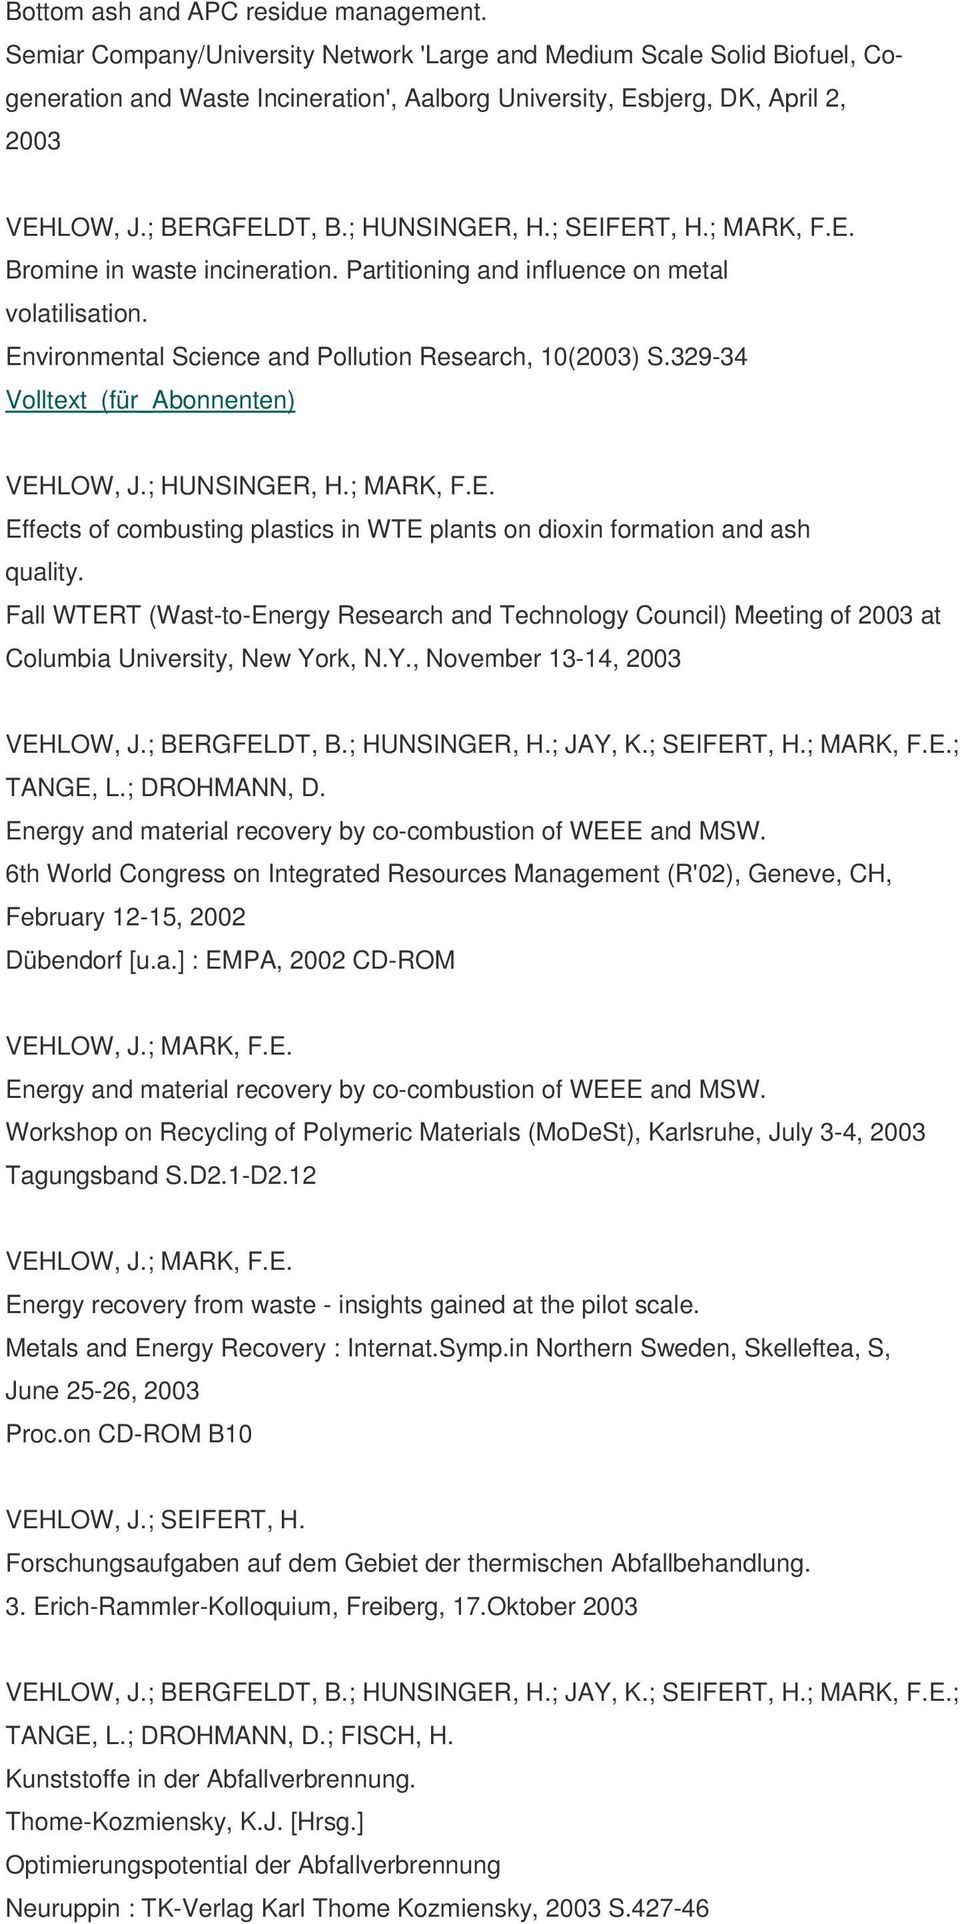 ; SEIFERT, H.; MARK, F.E. Bromine in waste incineration. Partitioning and influence on metal volatilisation. Environmental Science and Pollution Research, 10(2003) S.329-34 VEHLOW, J.; HUNSINGER, H.